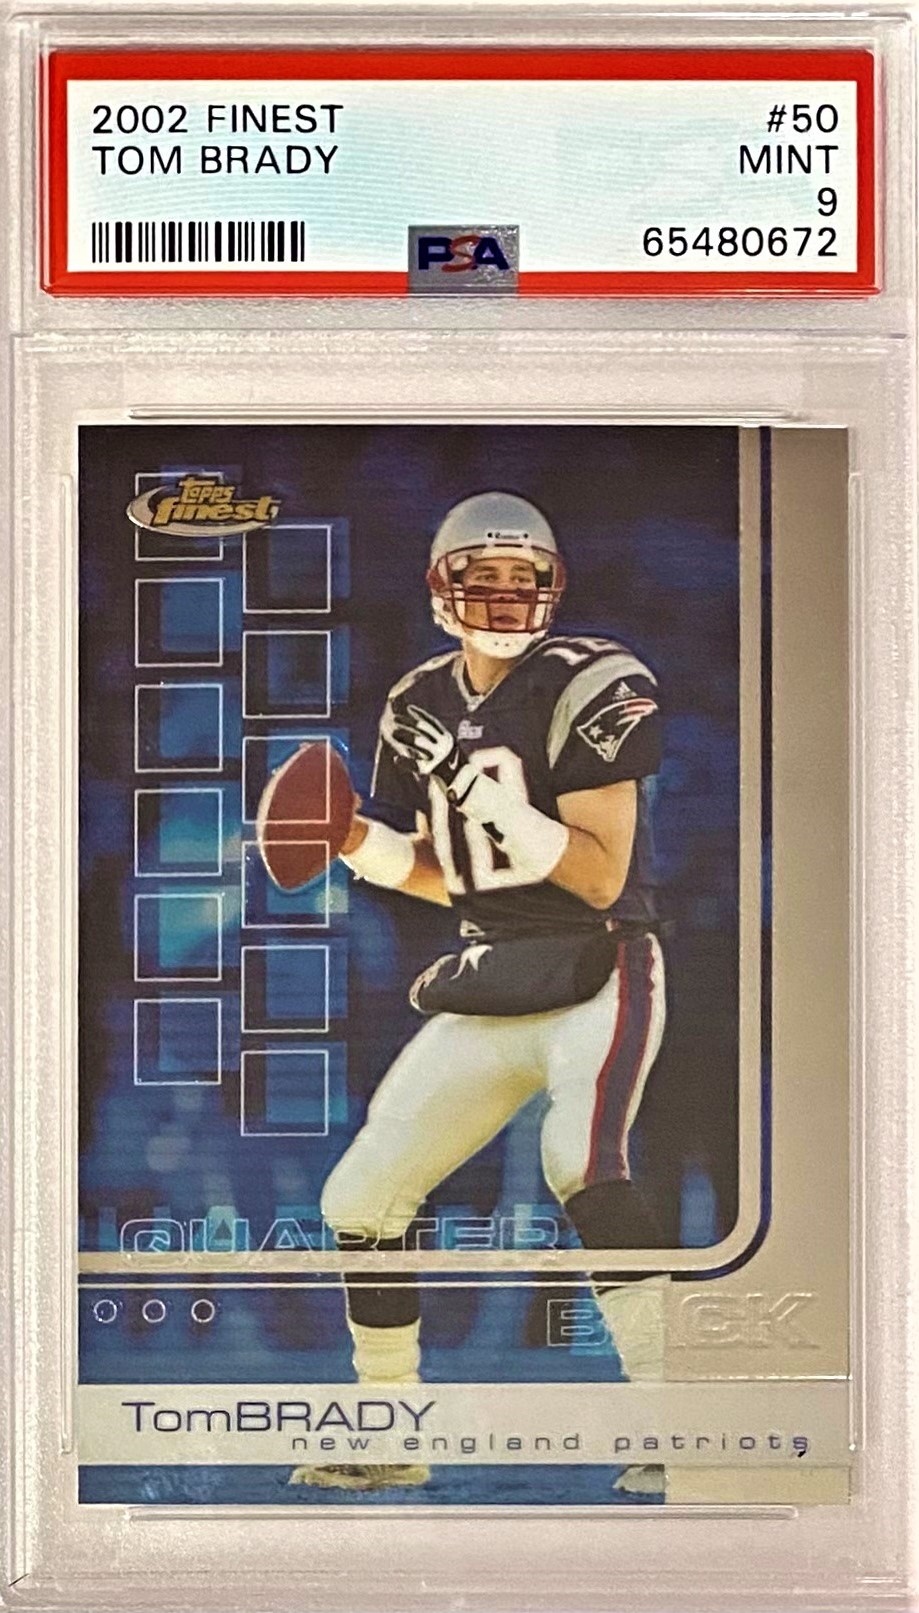 2021 Donruss Photo Variation #1 Tom Brady Tampa Bay Buccaneers Official NFL  Football Trading Card From Panini America in Raw (NM or Better) Condition